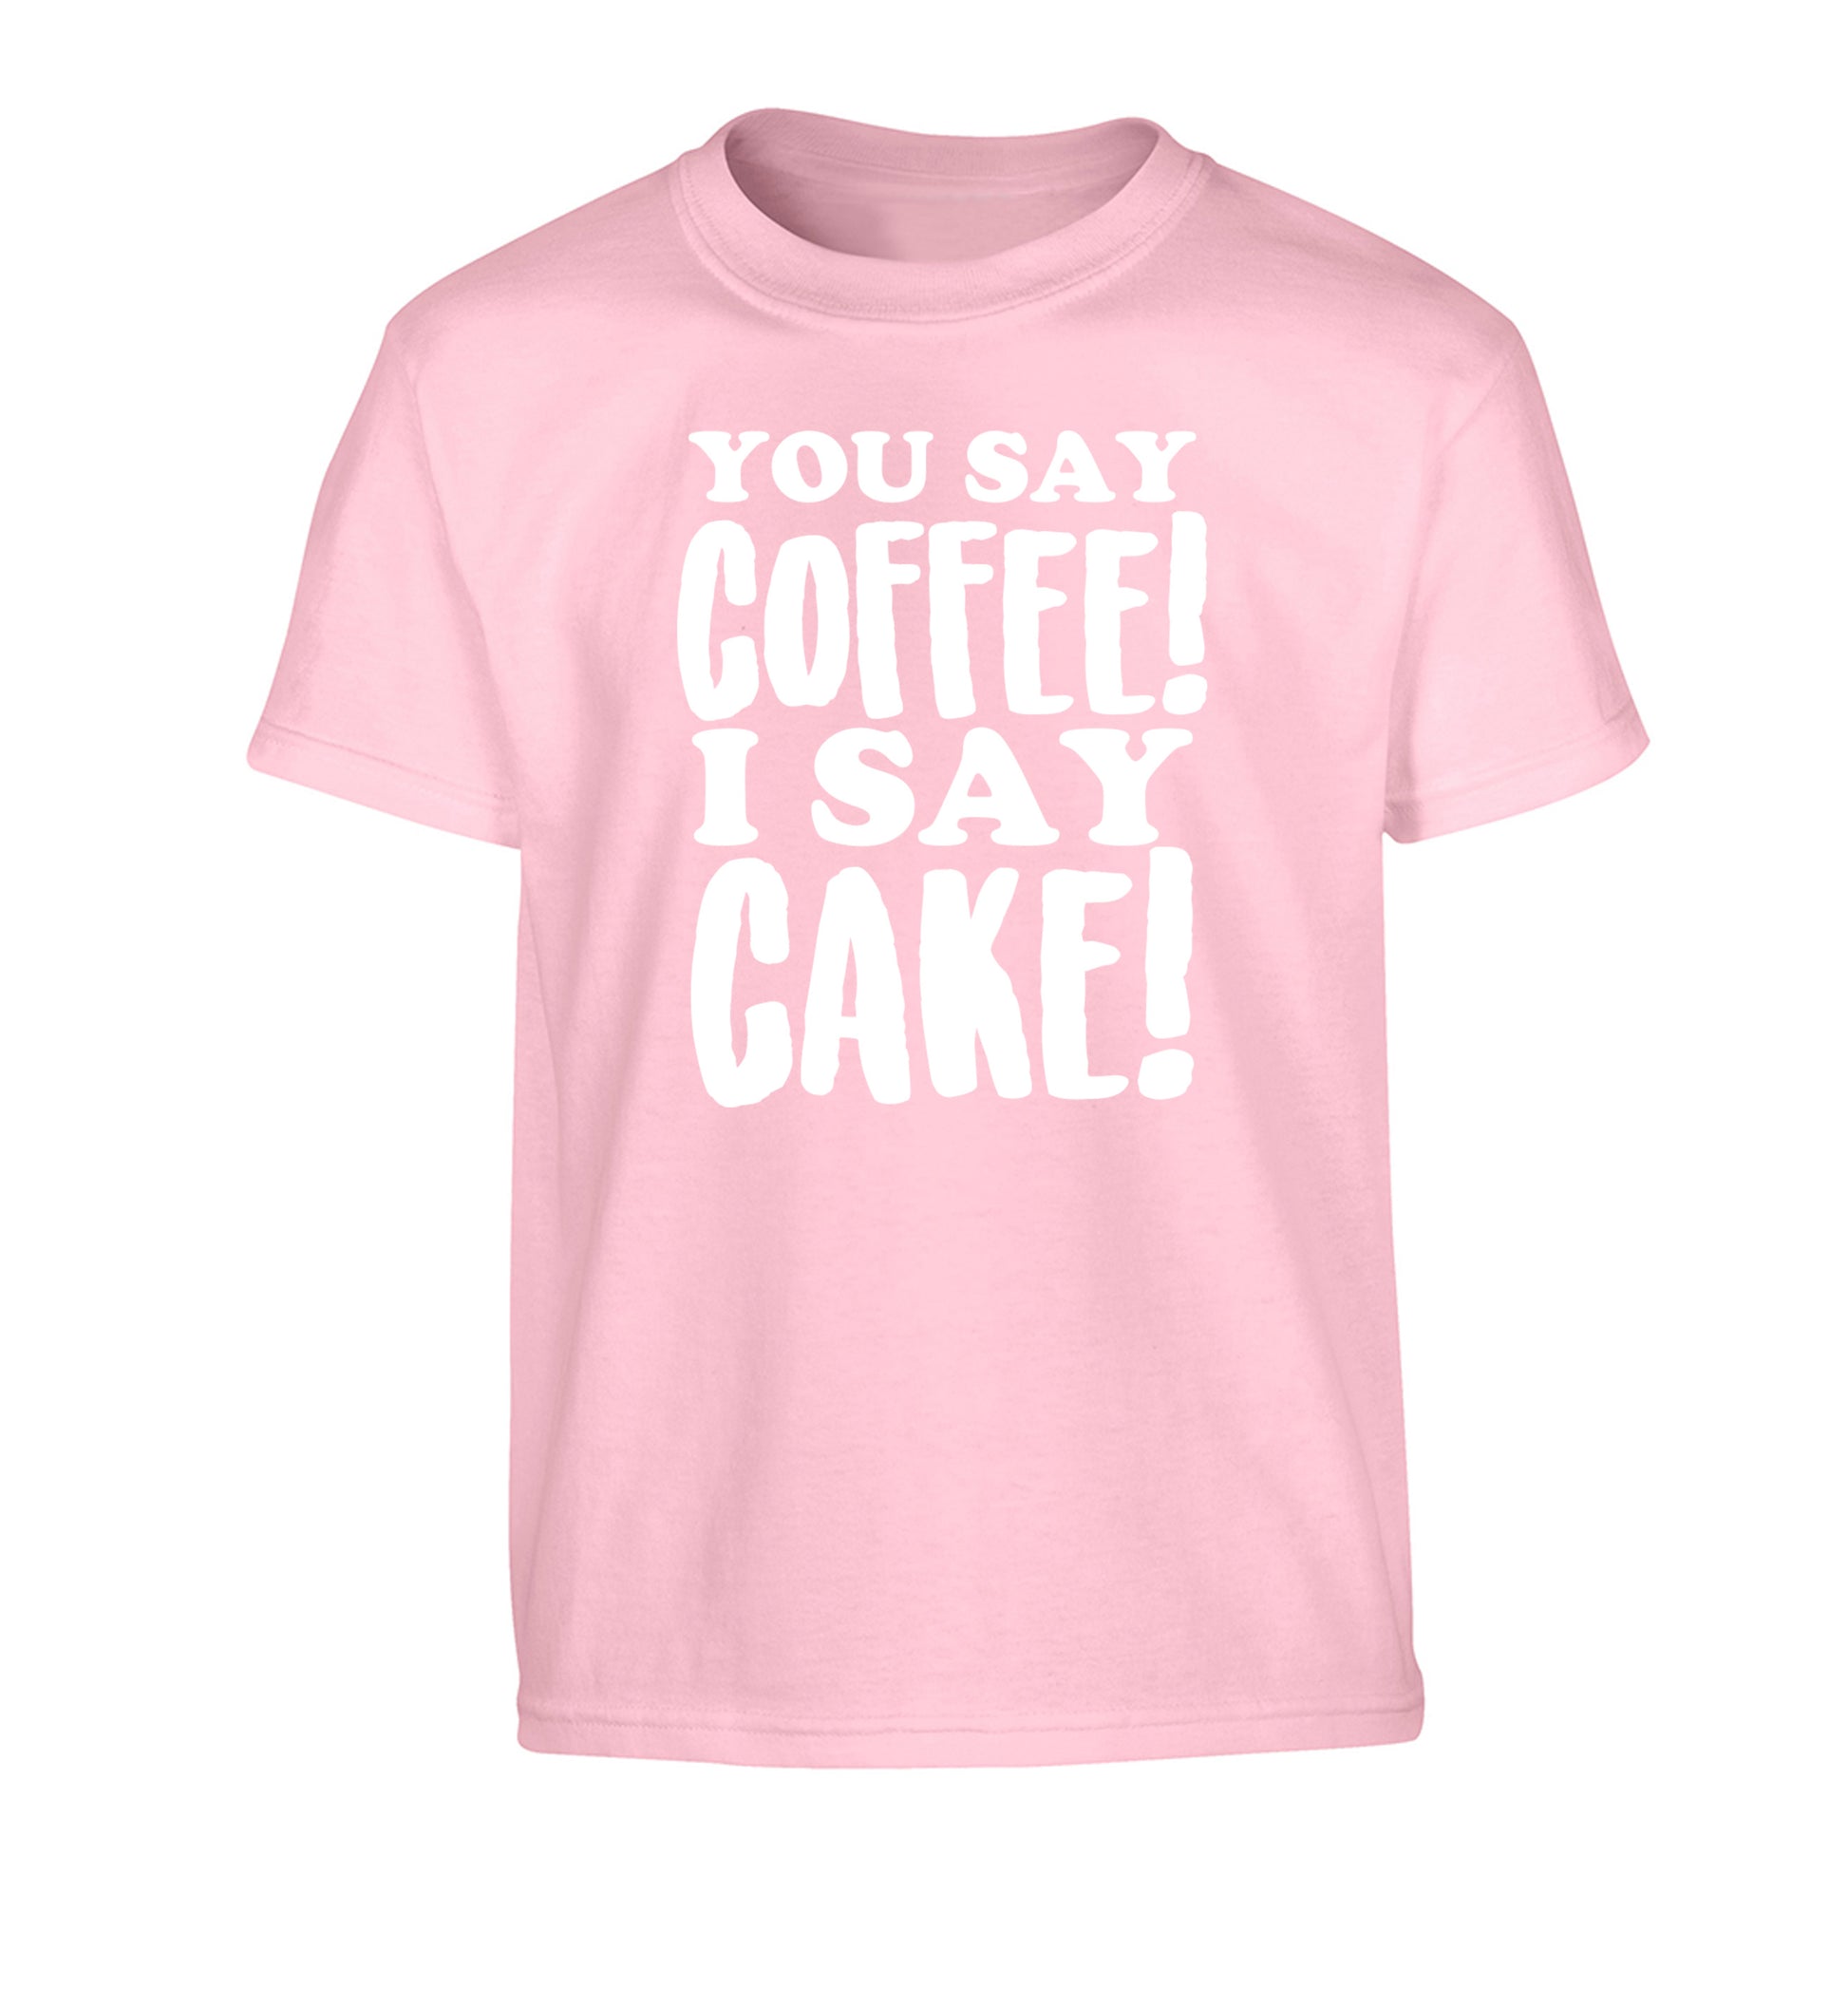 You say coffee I say cake! Children's light pink Tshirt 12-14 Years